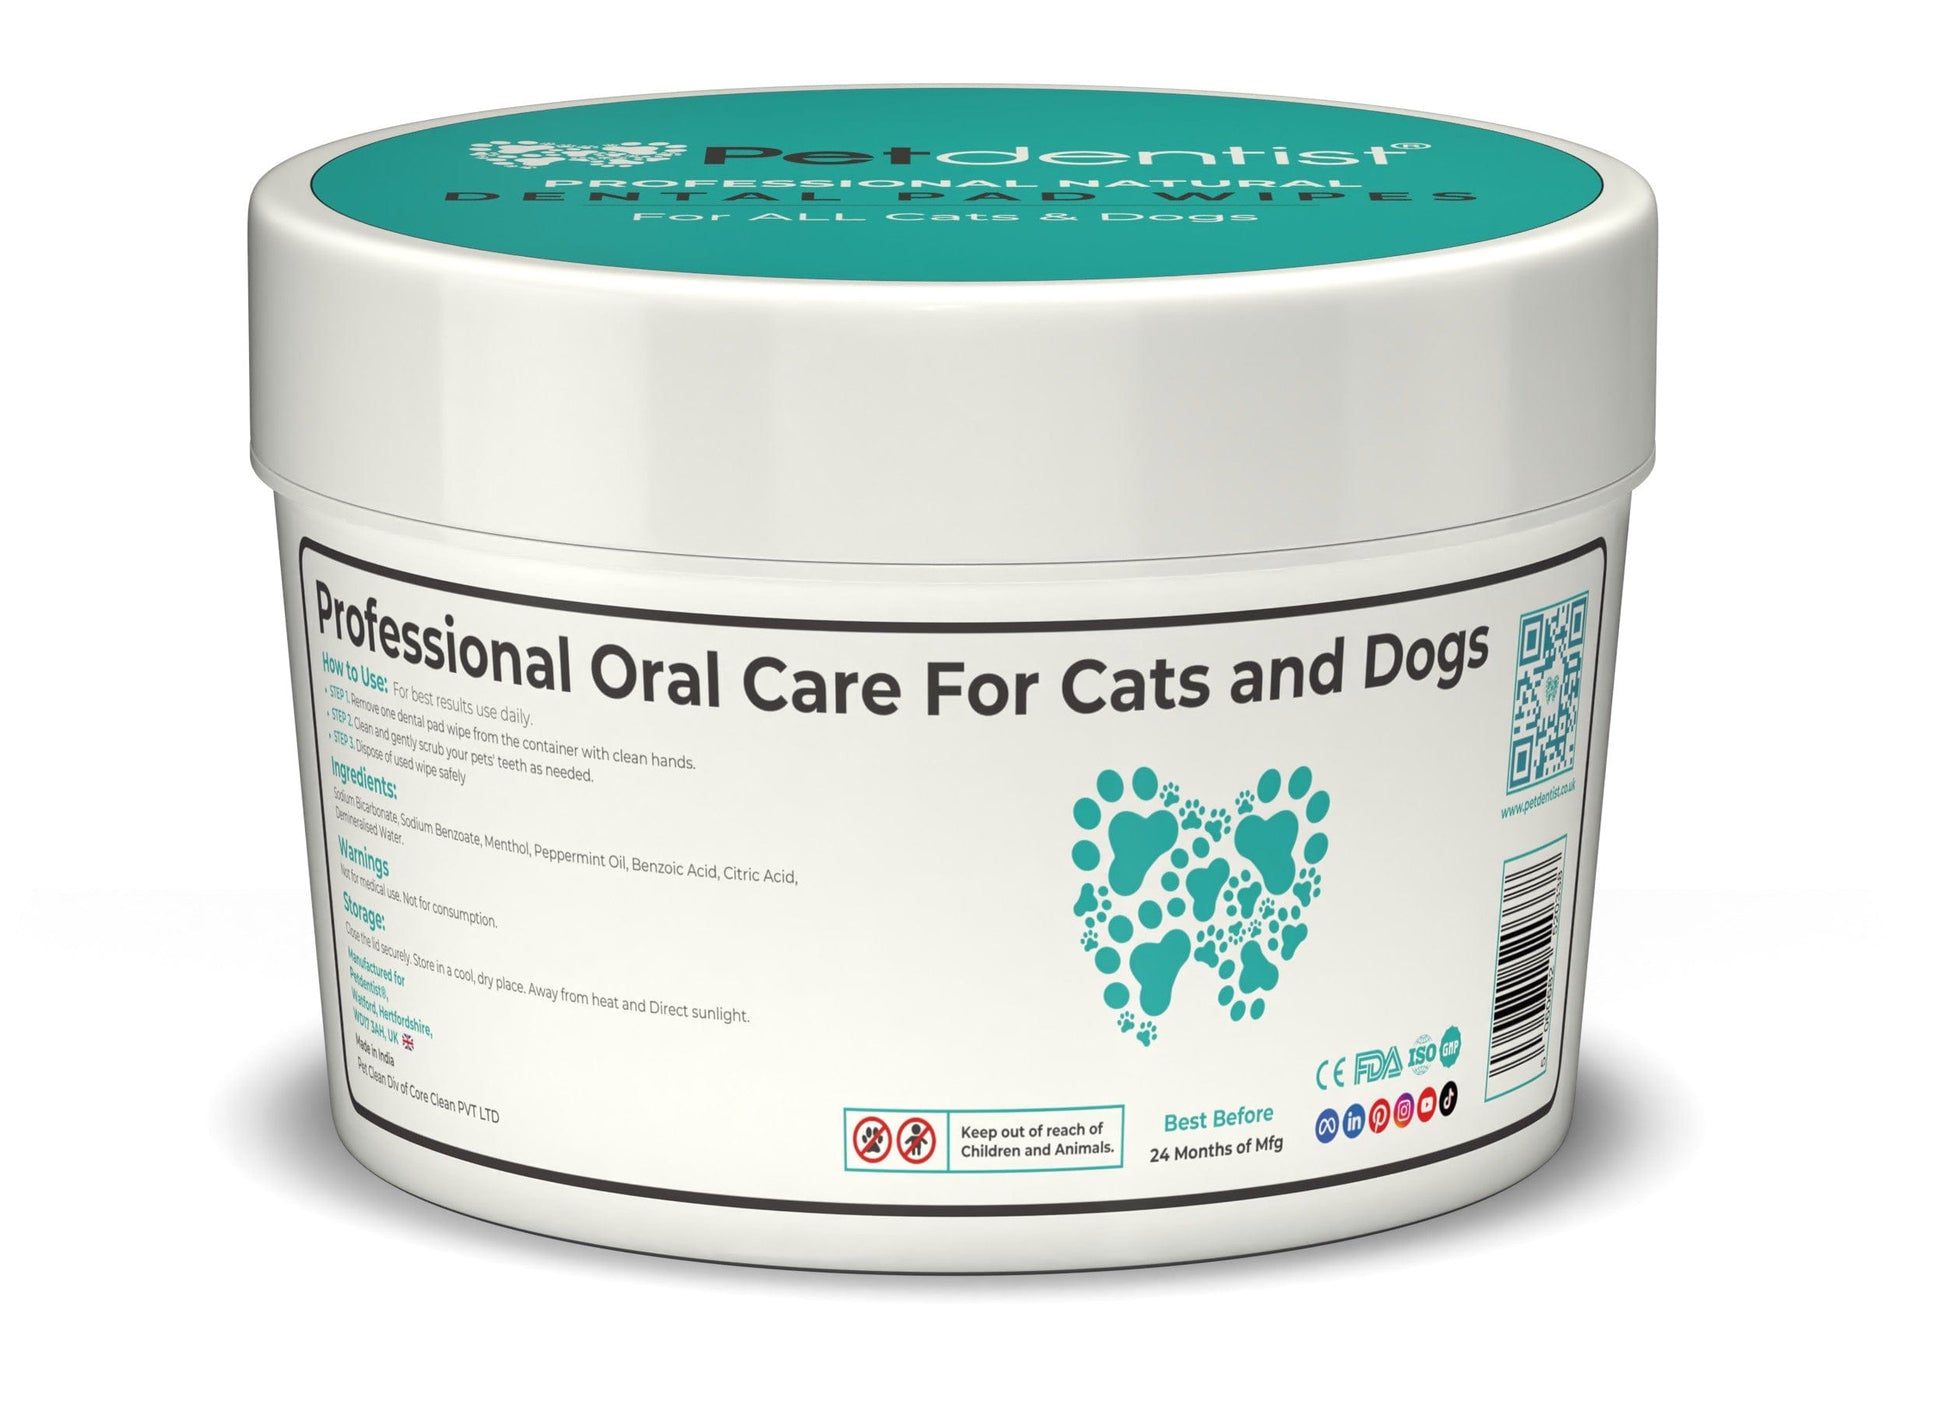 Petdentist® Pink Petdentist Dental Wipes for Dogs and Cats-50 Embossed Textured Pads